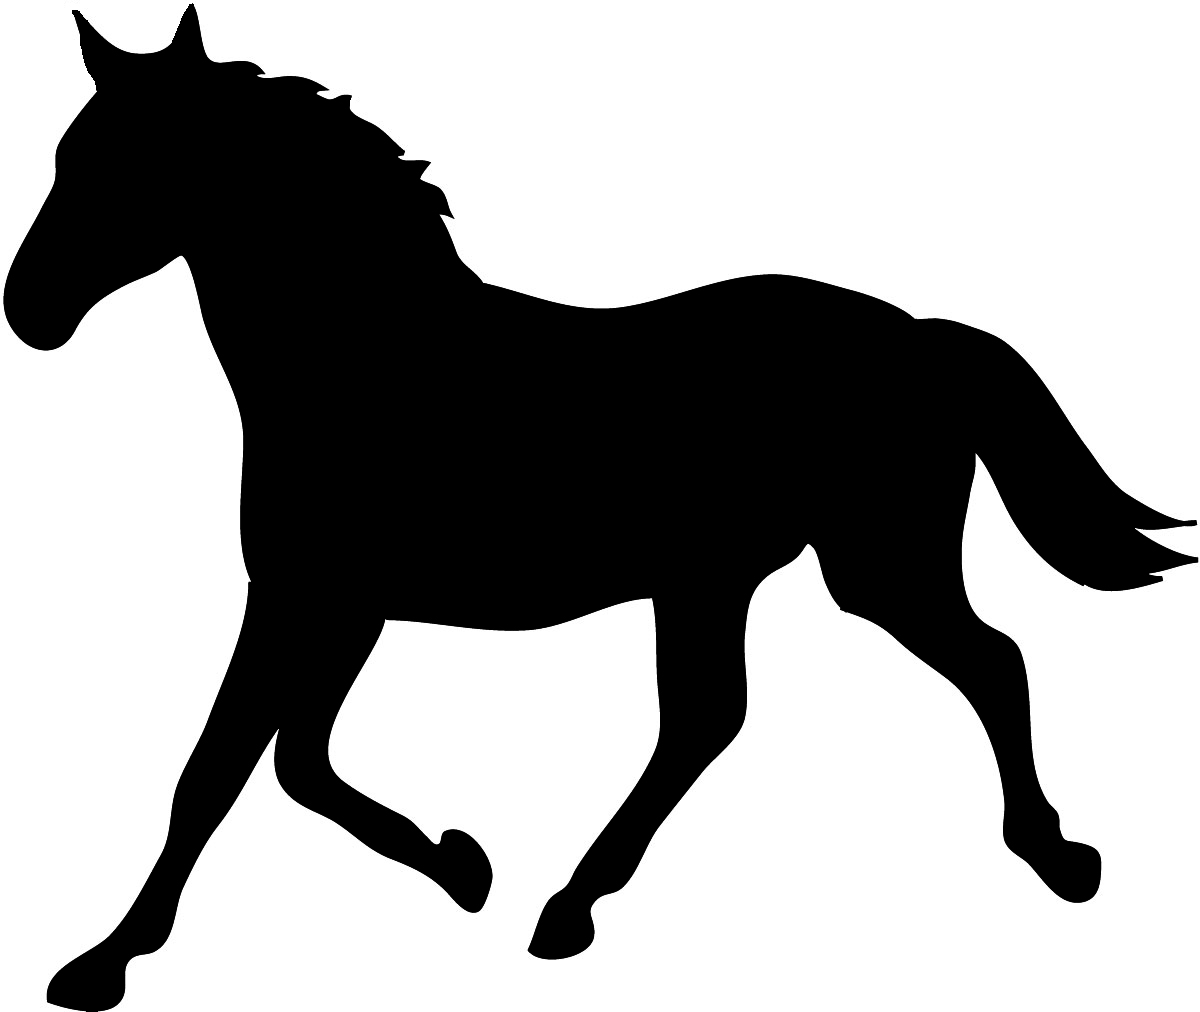 Running Horse Herd Silhouette | Clipart Panda - Free Clipart Images